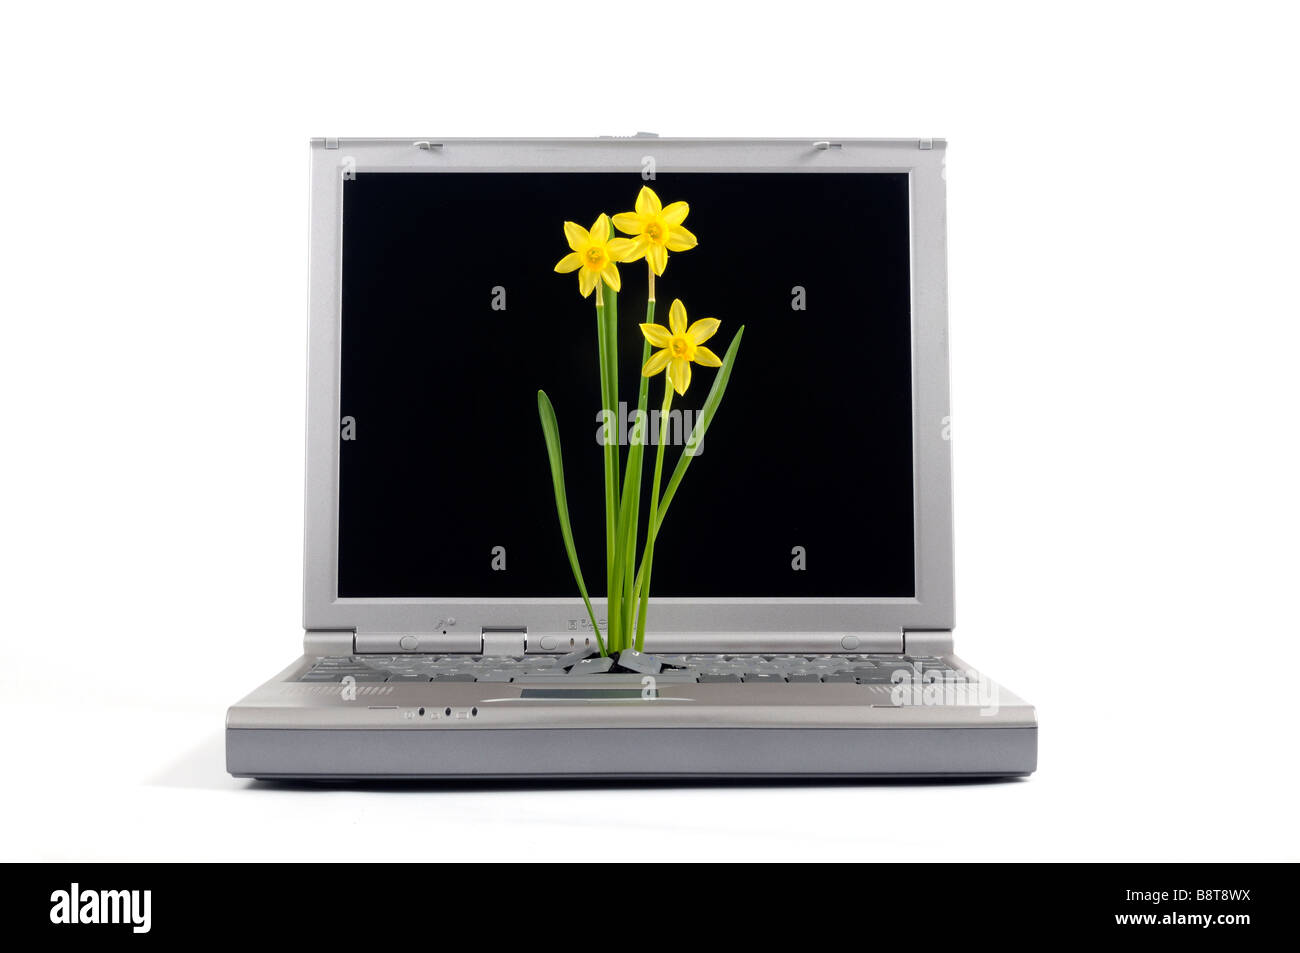 A Laptop computer  with  daffodils growing out of the keyboard Stock Photo